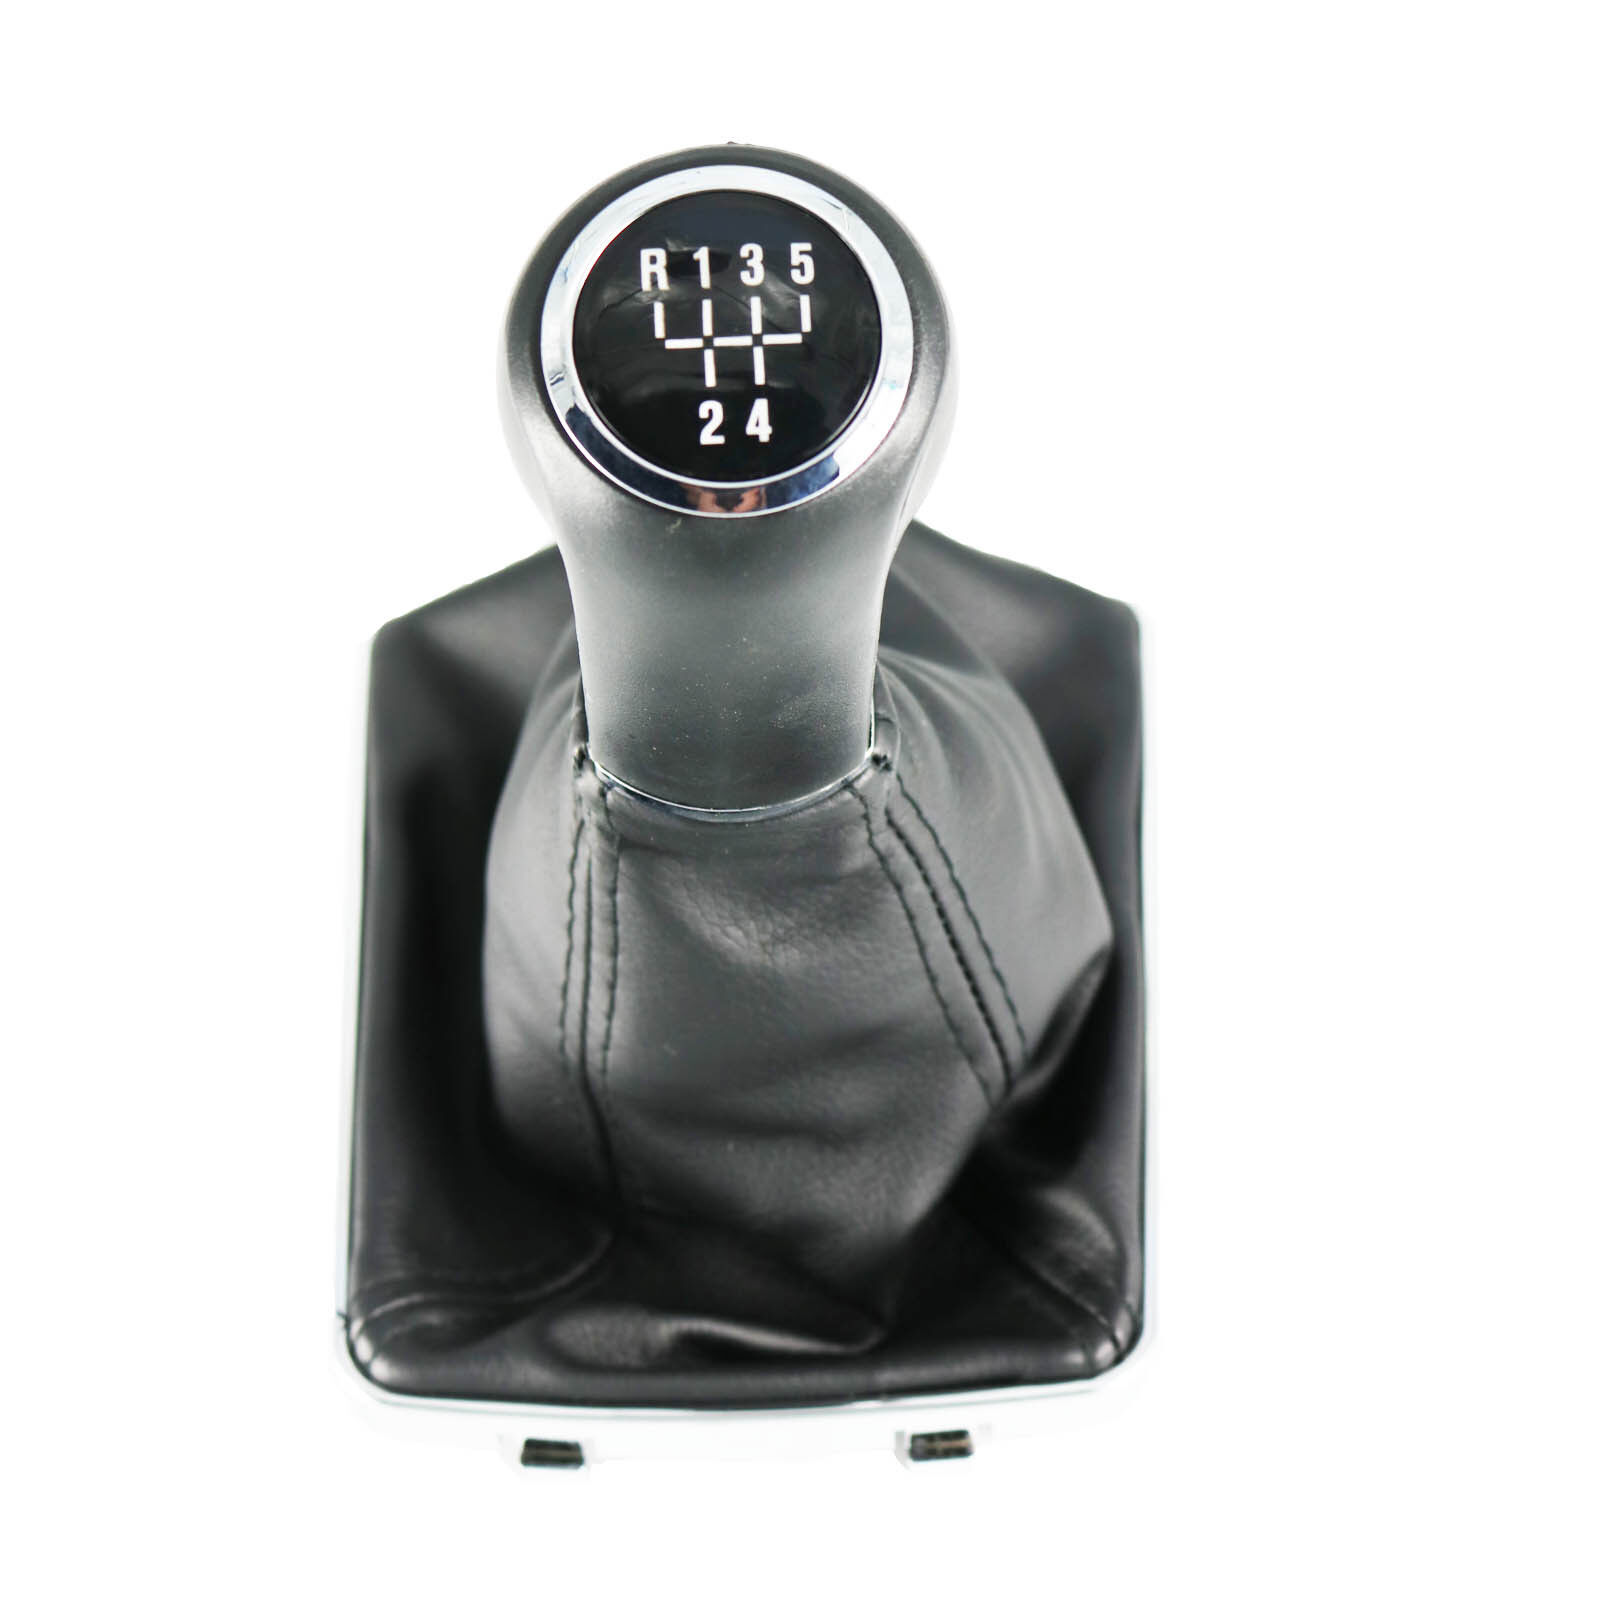 For OPEL ASTRA CORSA 2005-2010 5 Speed Automatic Gear Shift Knob PU Leather Boot